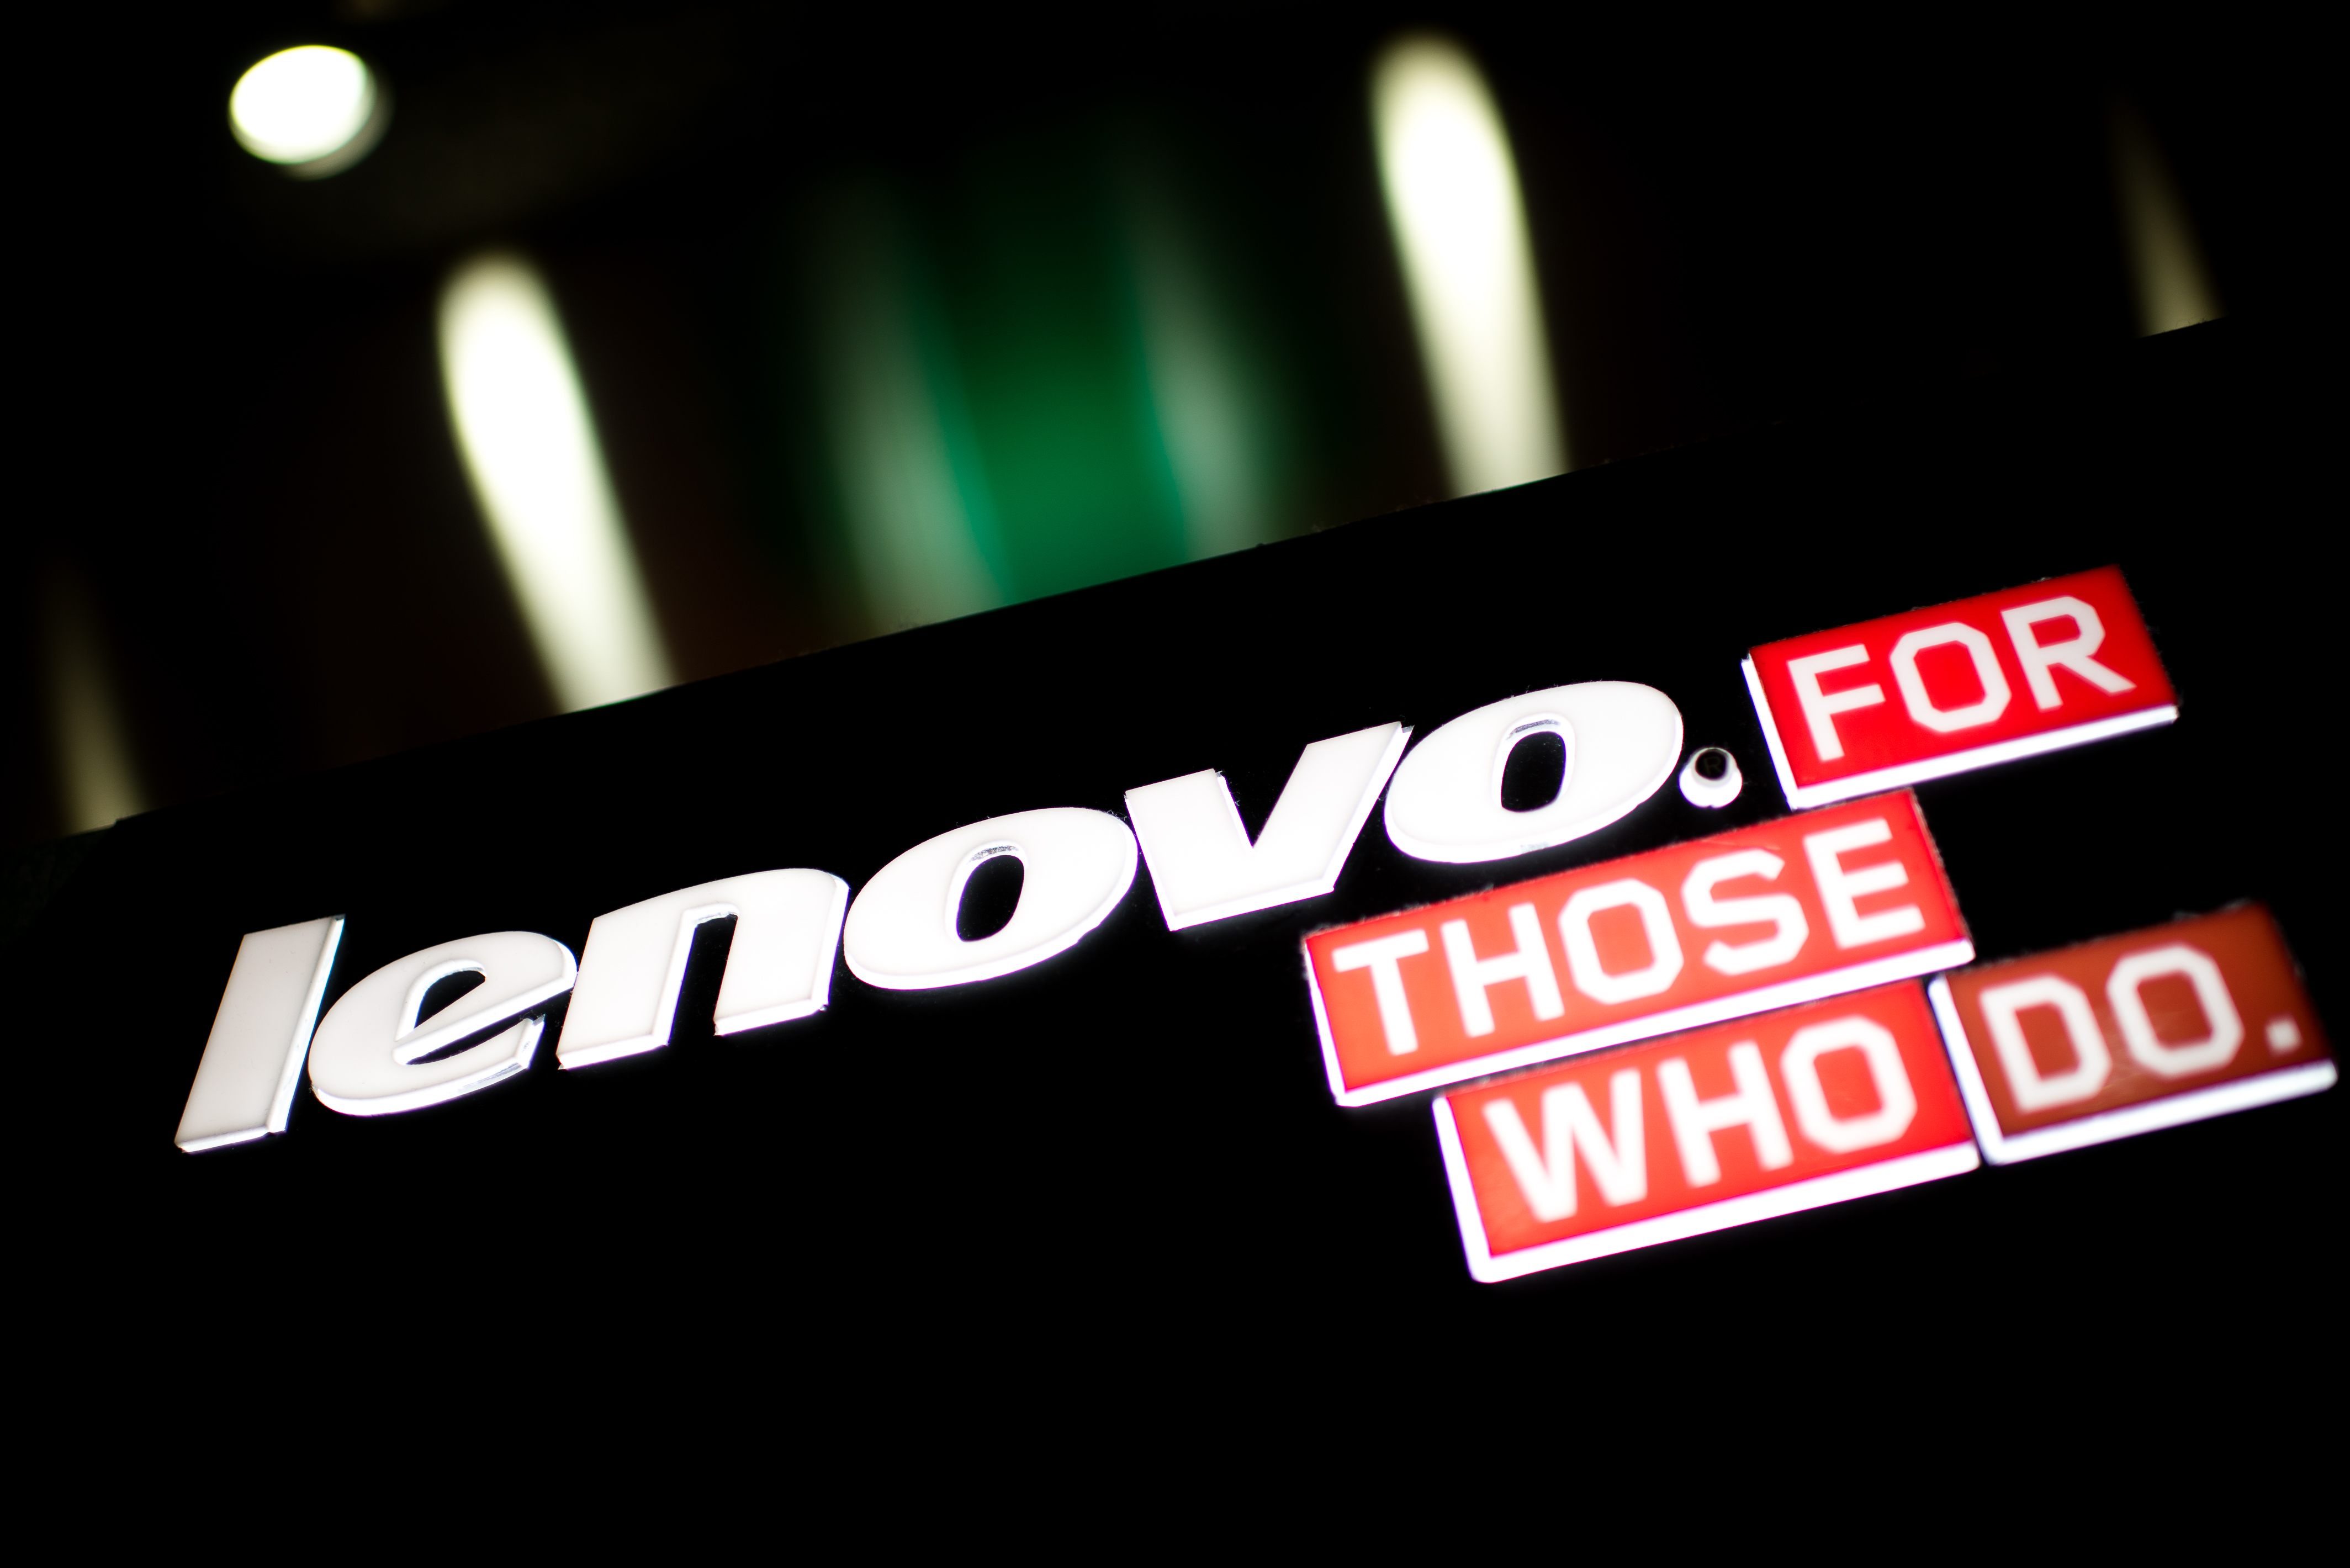 A logo of Chinese computer giant Lenovo is displayed in Hong Kong on February 13, 2014. Lenovo Chairman Yang Yuanqing pledged on February 13 to make the company the world's third-biggest smartphone seller following an acquisition binge as the firm announced a 30 percent profit surge.  AFP PHOTO / Philippe Lopez / AFP PHOTO / PHILIPPE LOPEZ